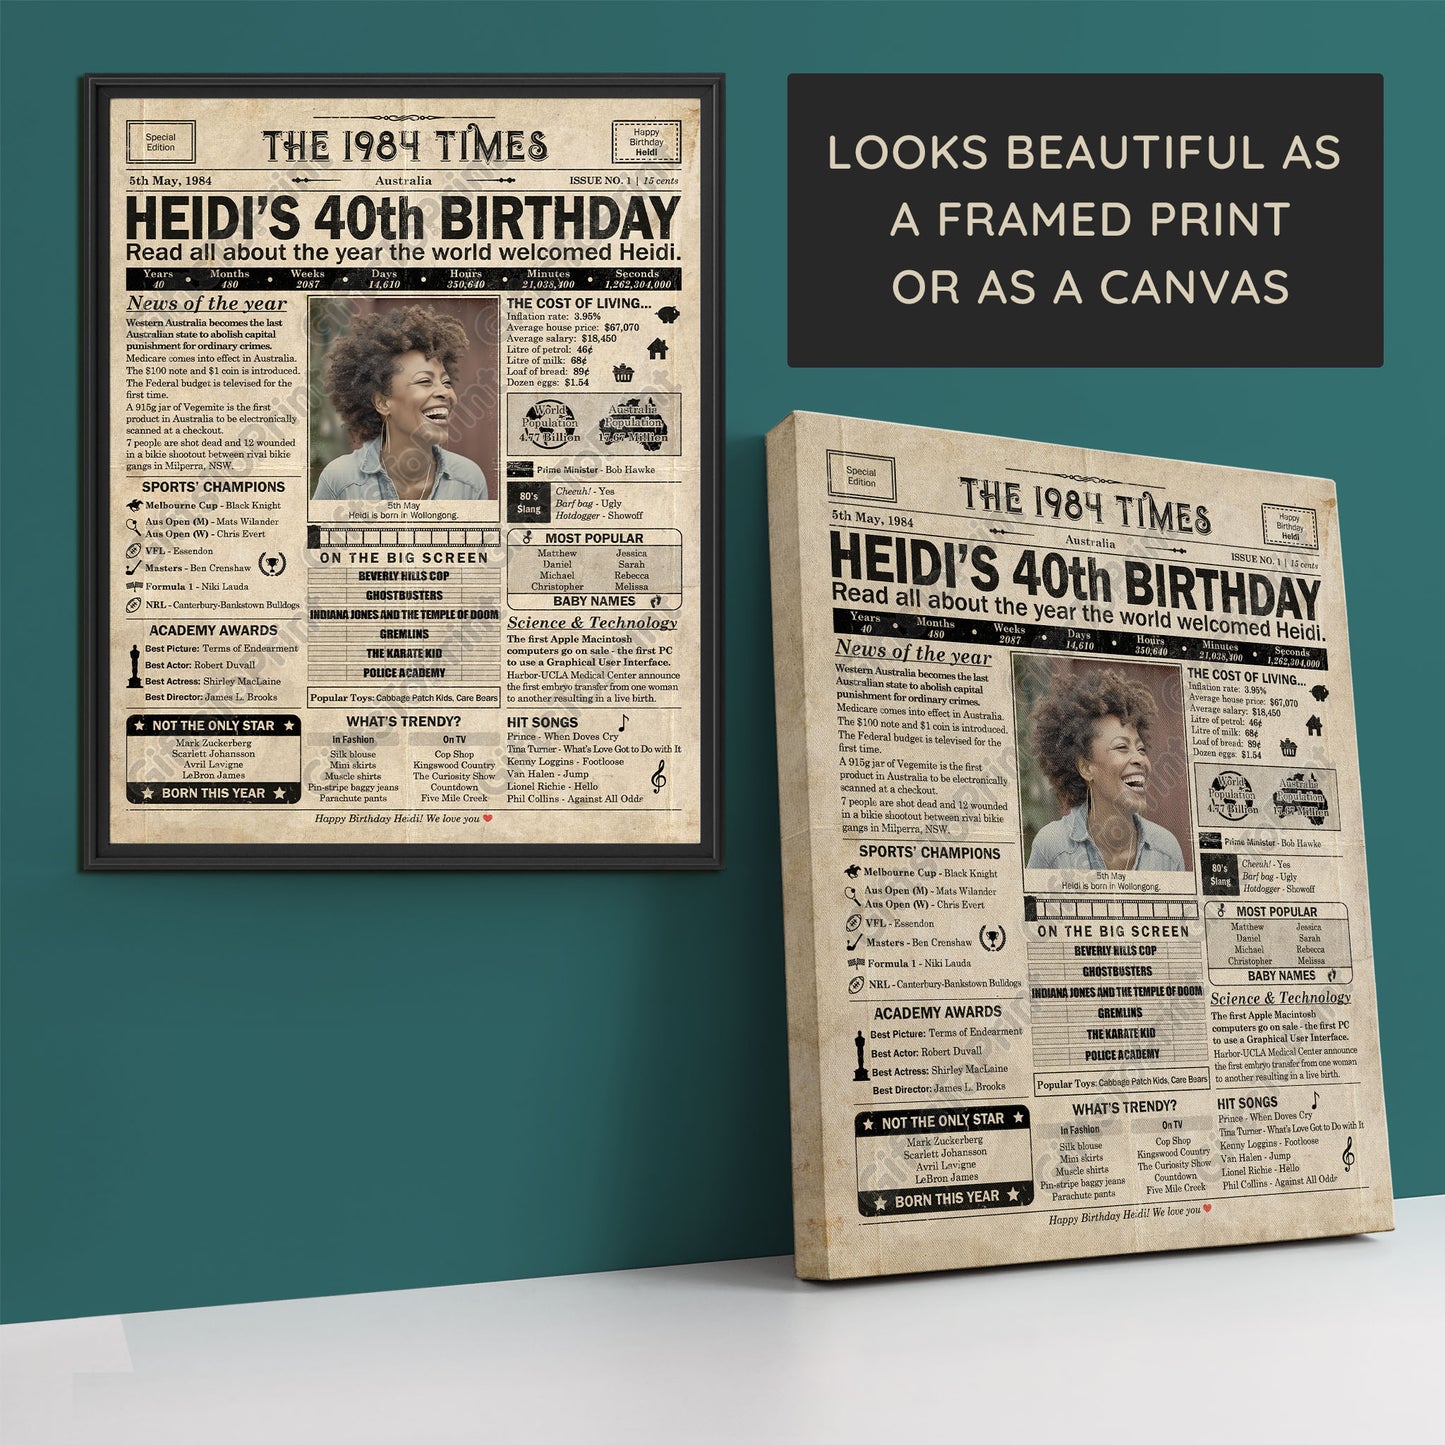 Personalised 40th Birthday Gift: A Printable AUSTRALIAN Birthday Poster of 1984